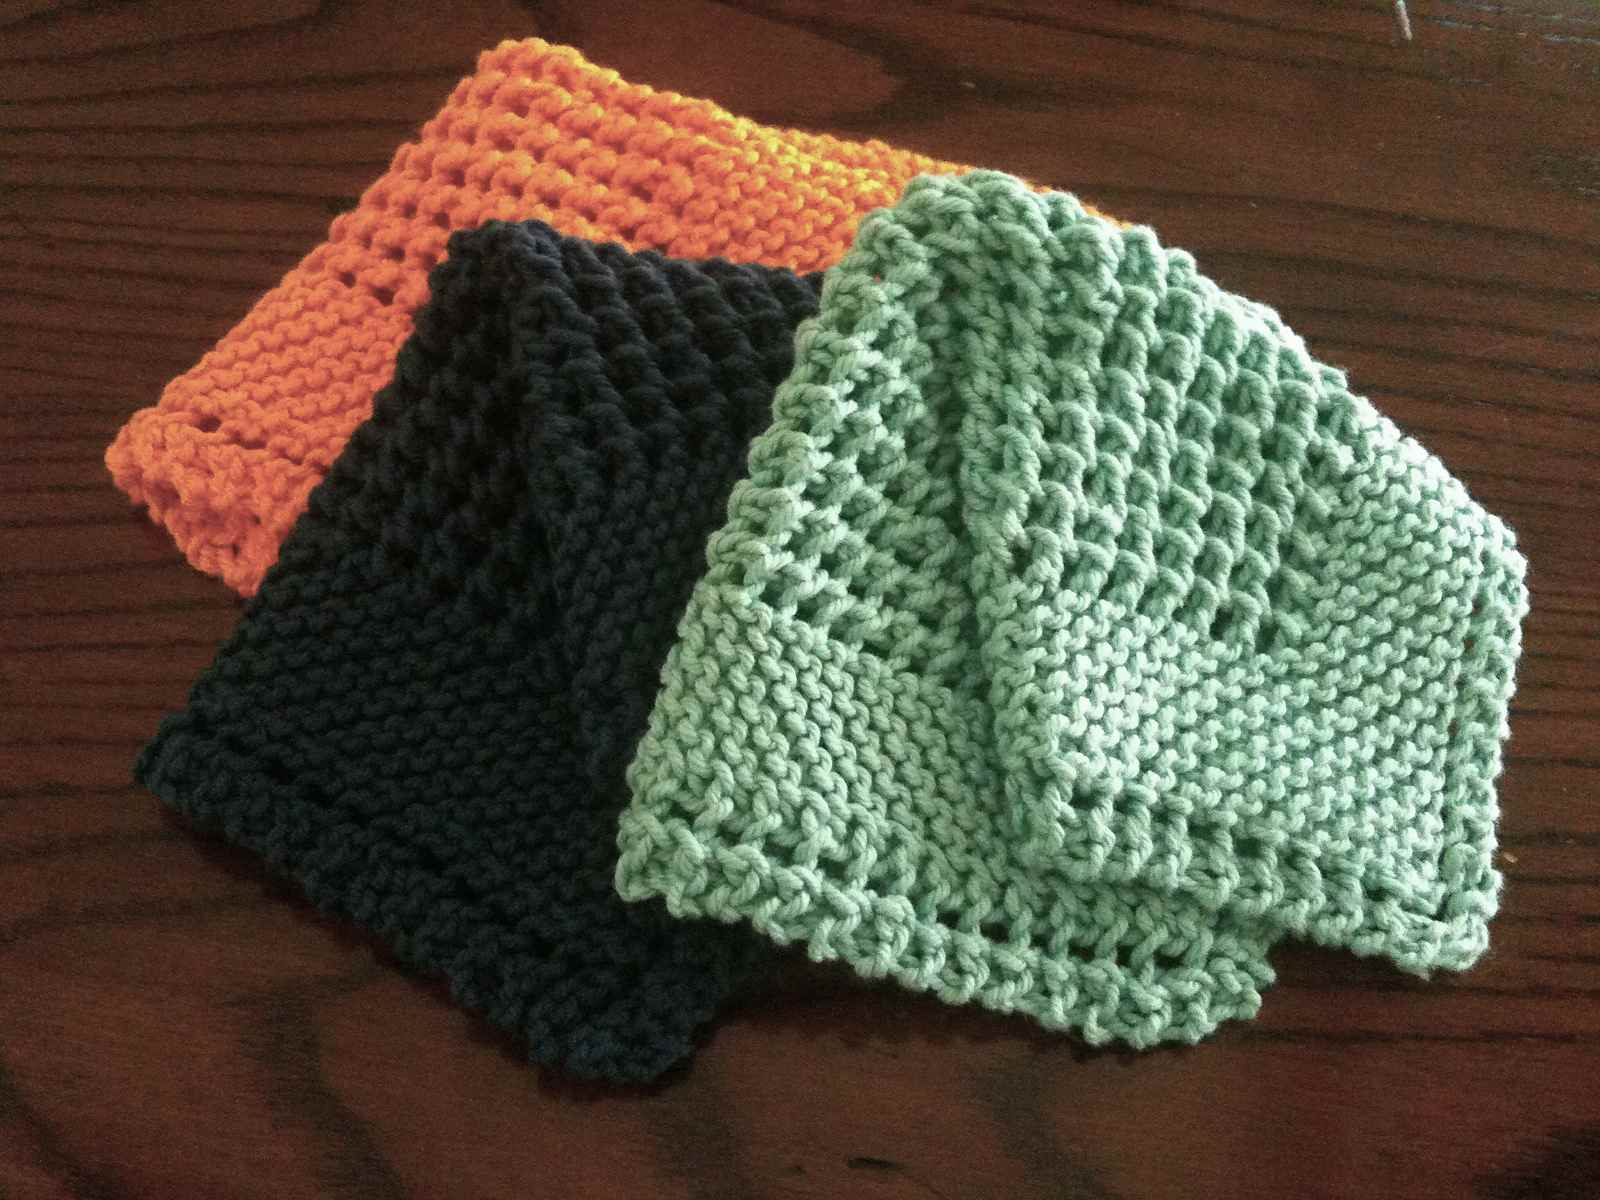 Easy Dishcloth Knit Pattern 10 Knit Dishcloth Patterns For Beginners